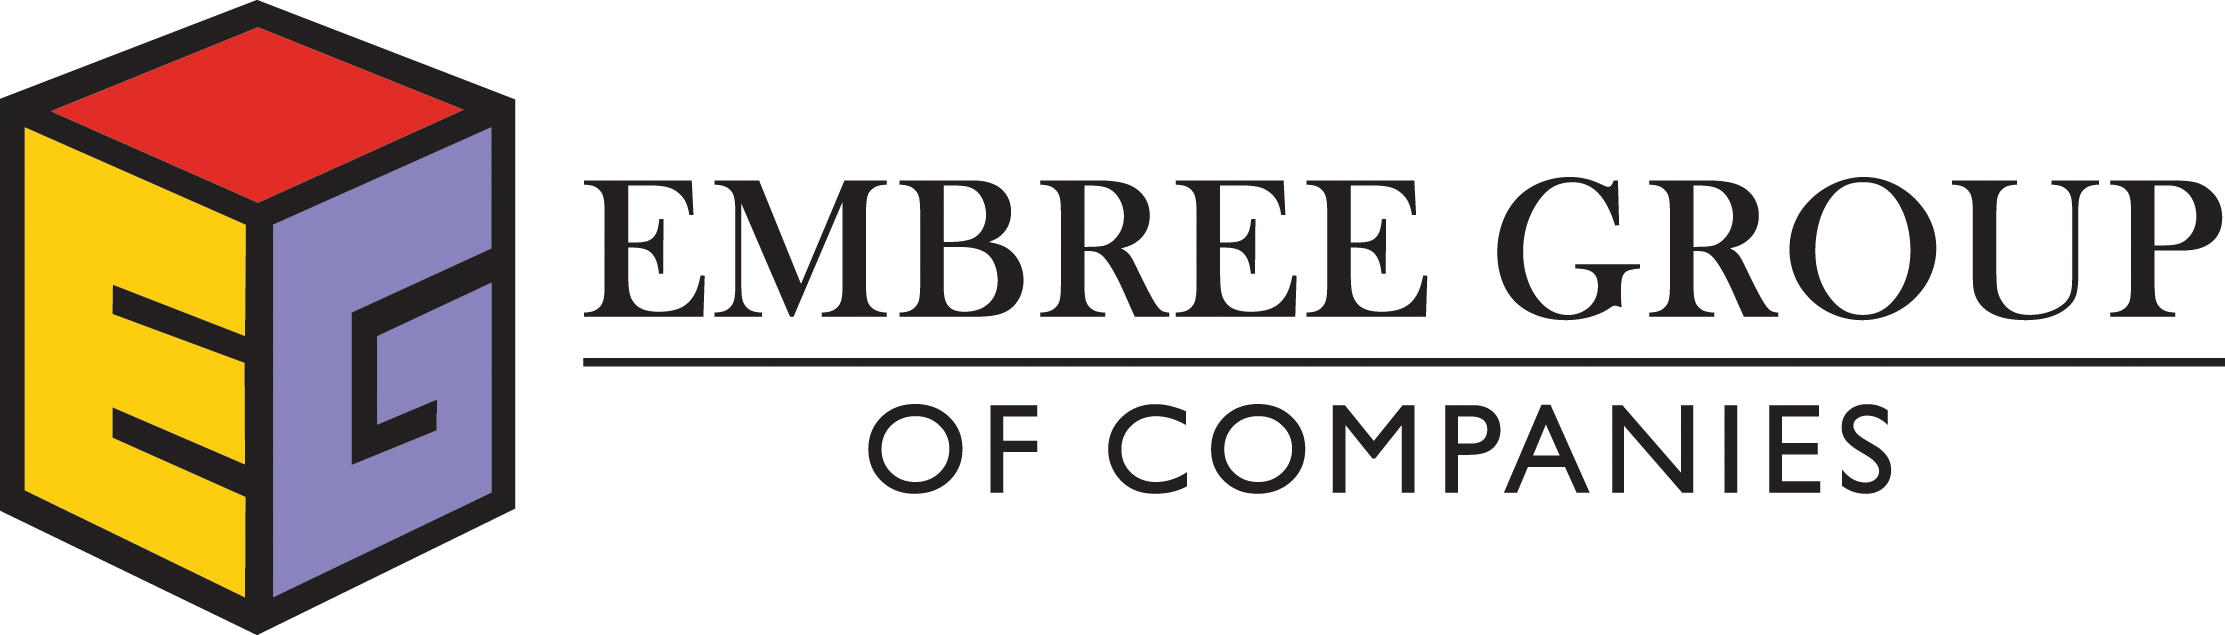 Embree Group of Companies logo